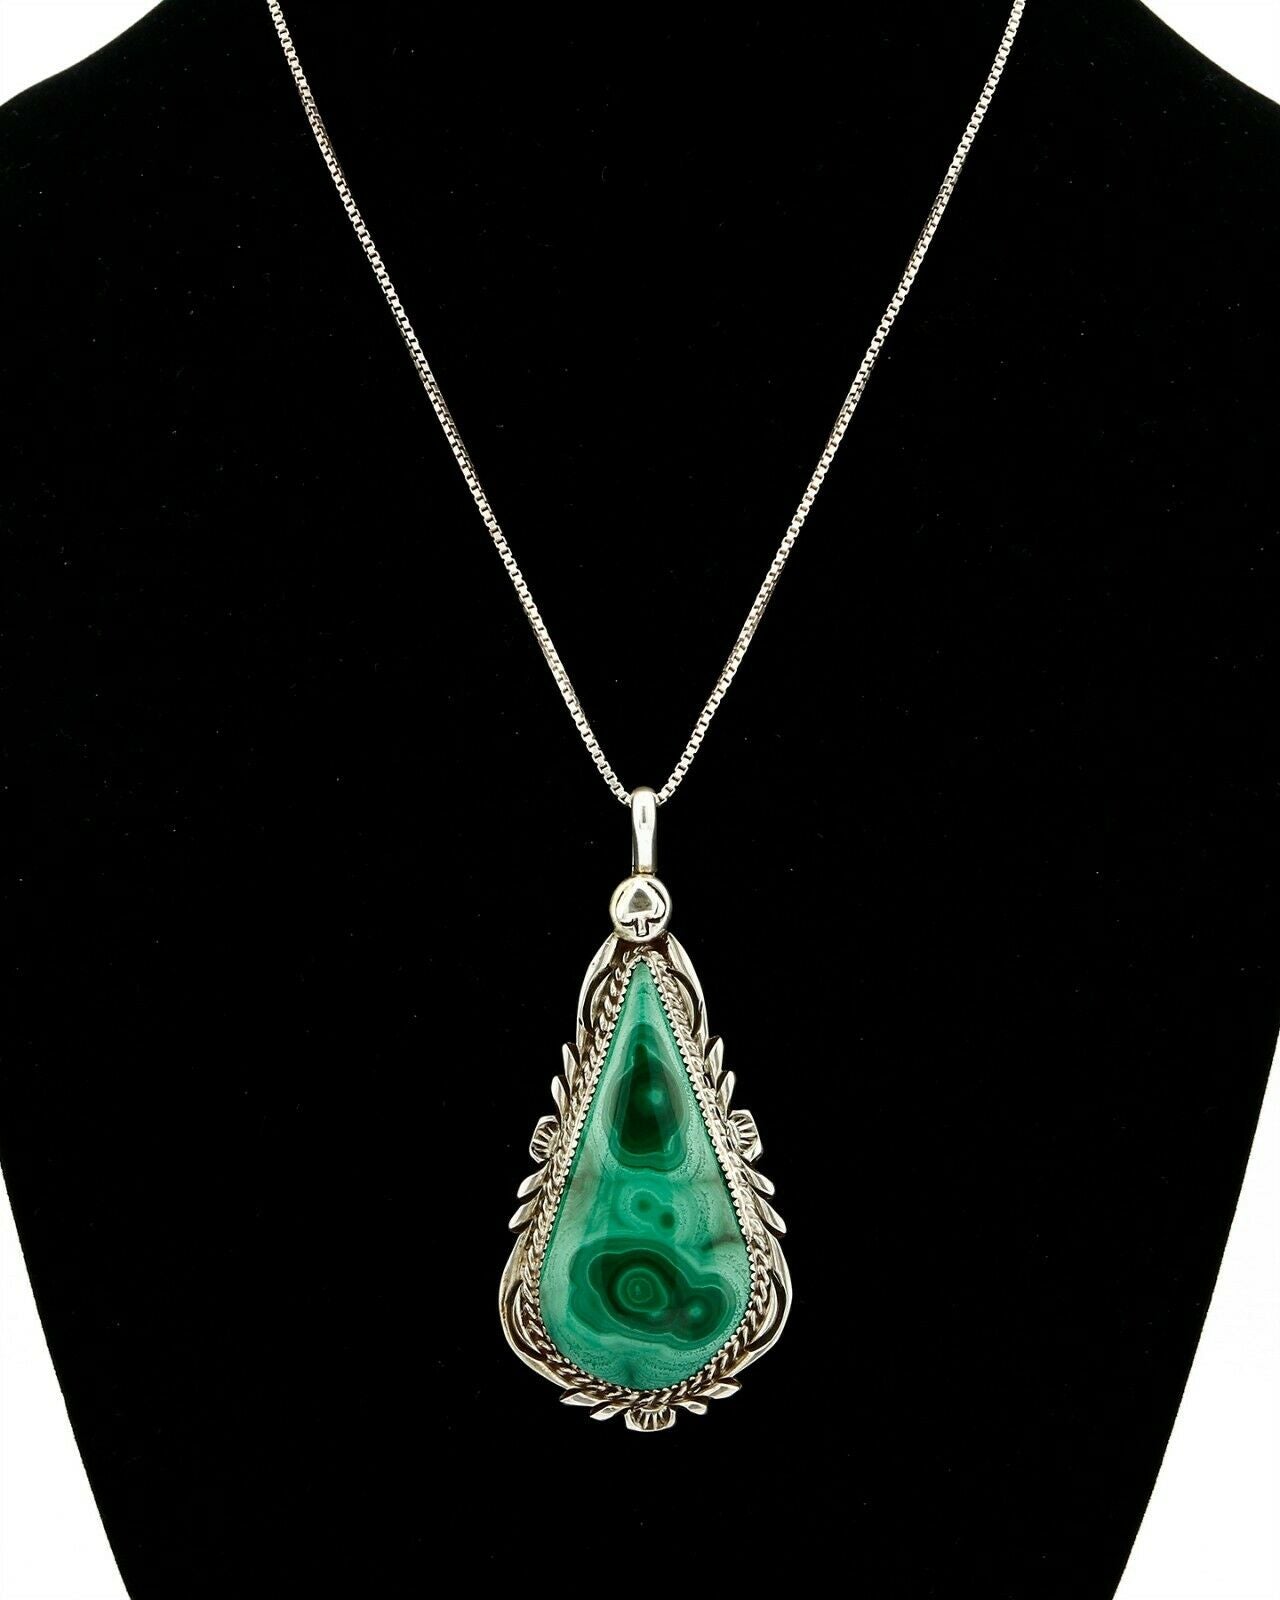 C.80-90's Navajo Billy Eagle .925 SOLID Silver Natural Mined Malachite Necklace